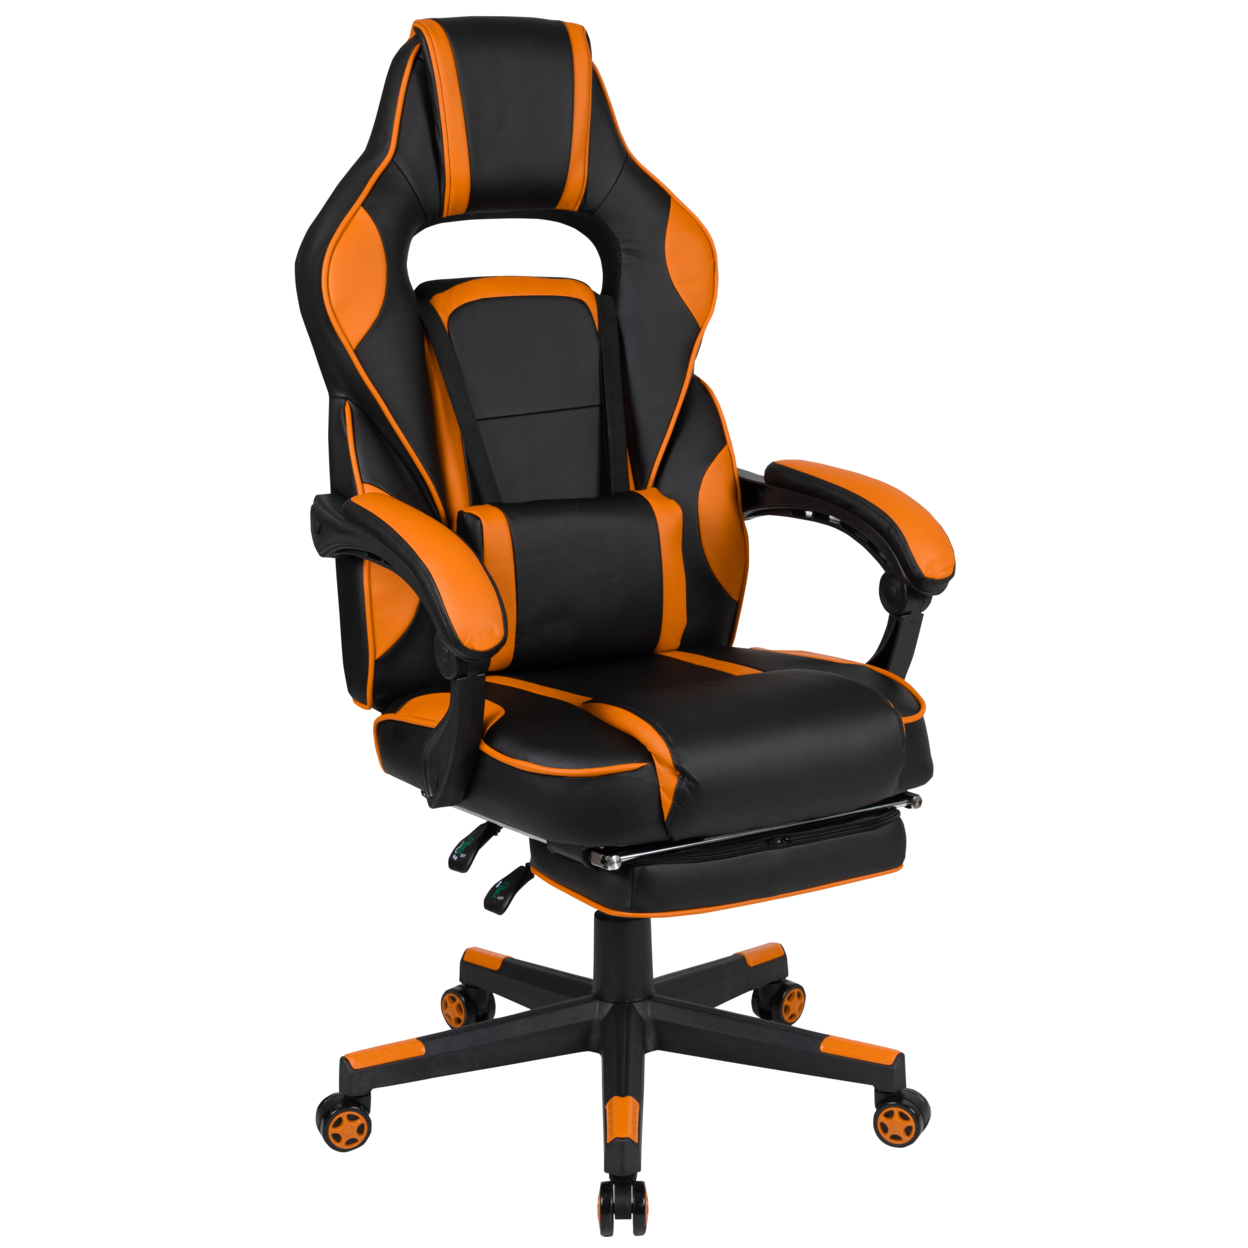 X40 Gaming Chair Racing Ergonomic Computer Chair With Fully Reclining Back And Arms, Slide-Out Footrest, Massaging Lumbar, Black And Orange